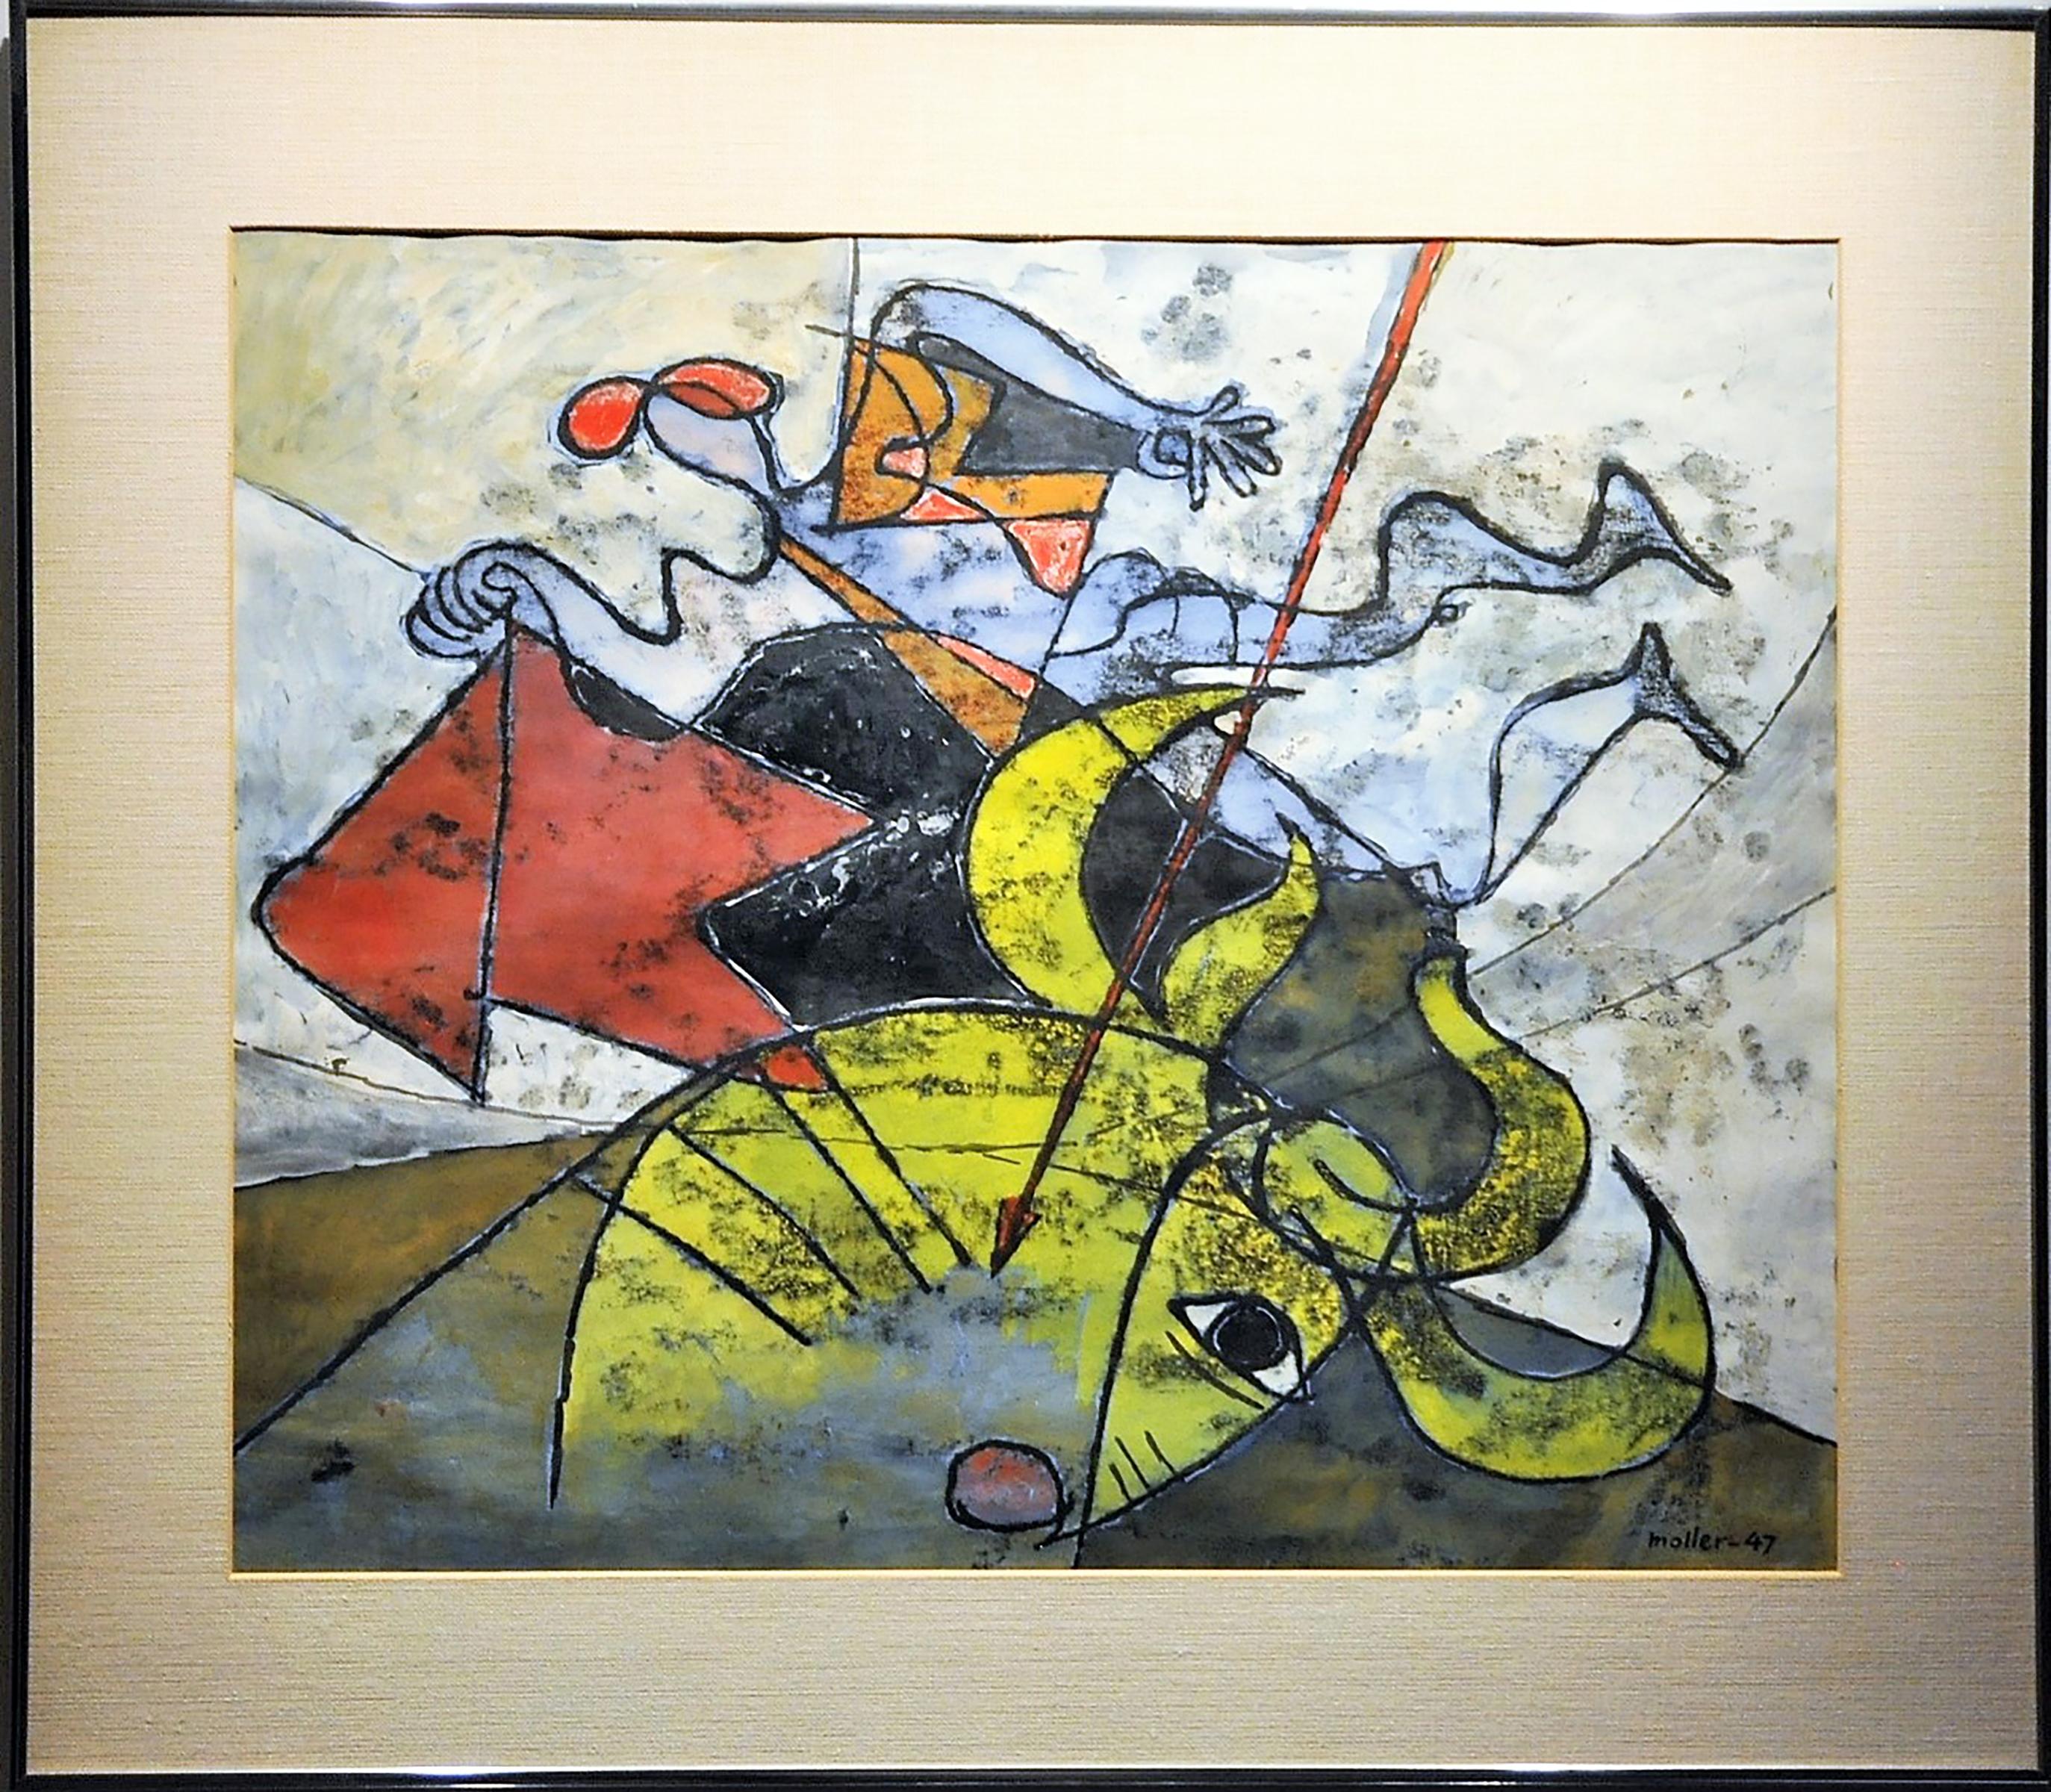 "Bull Fighter" by German American artist Hans Moller (1905 - 2000) is an abstract gouache on paper representing a bull fighter fighting a bull. The artwork is framed in a thin, extruded aluminum frame, matted, under glass.

Hans Moller was a German